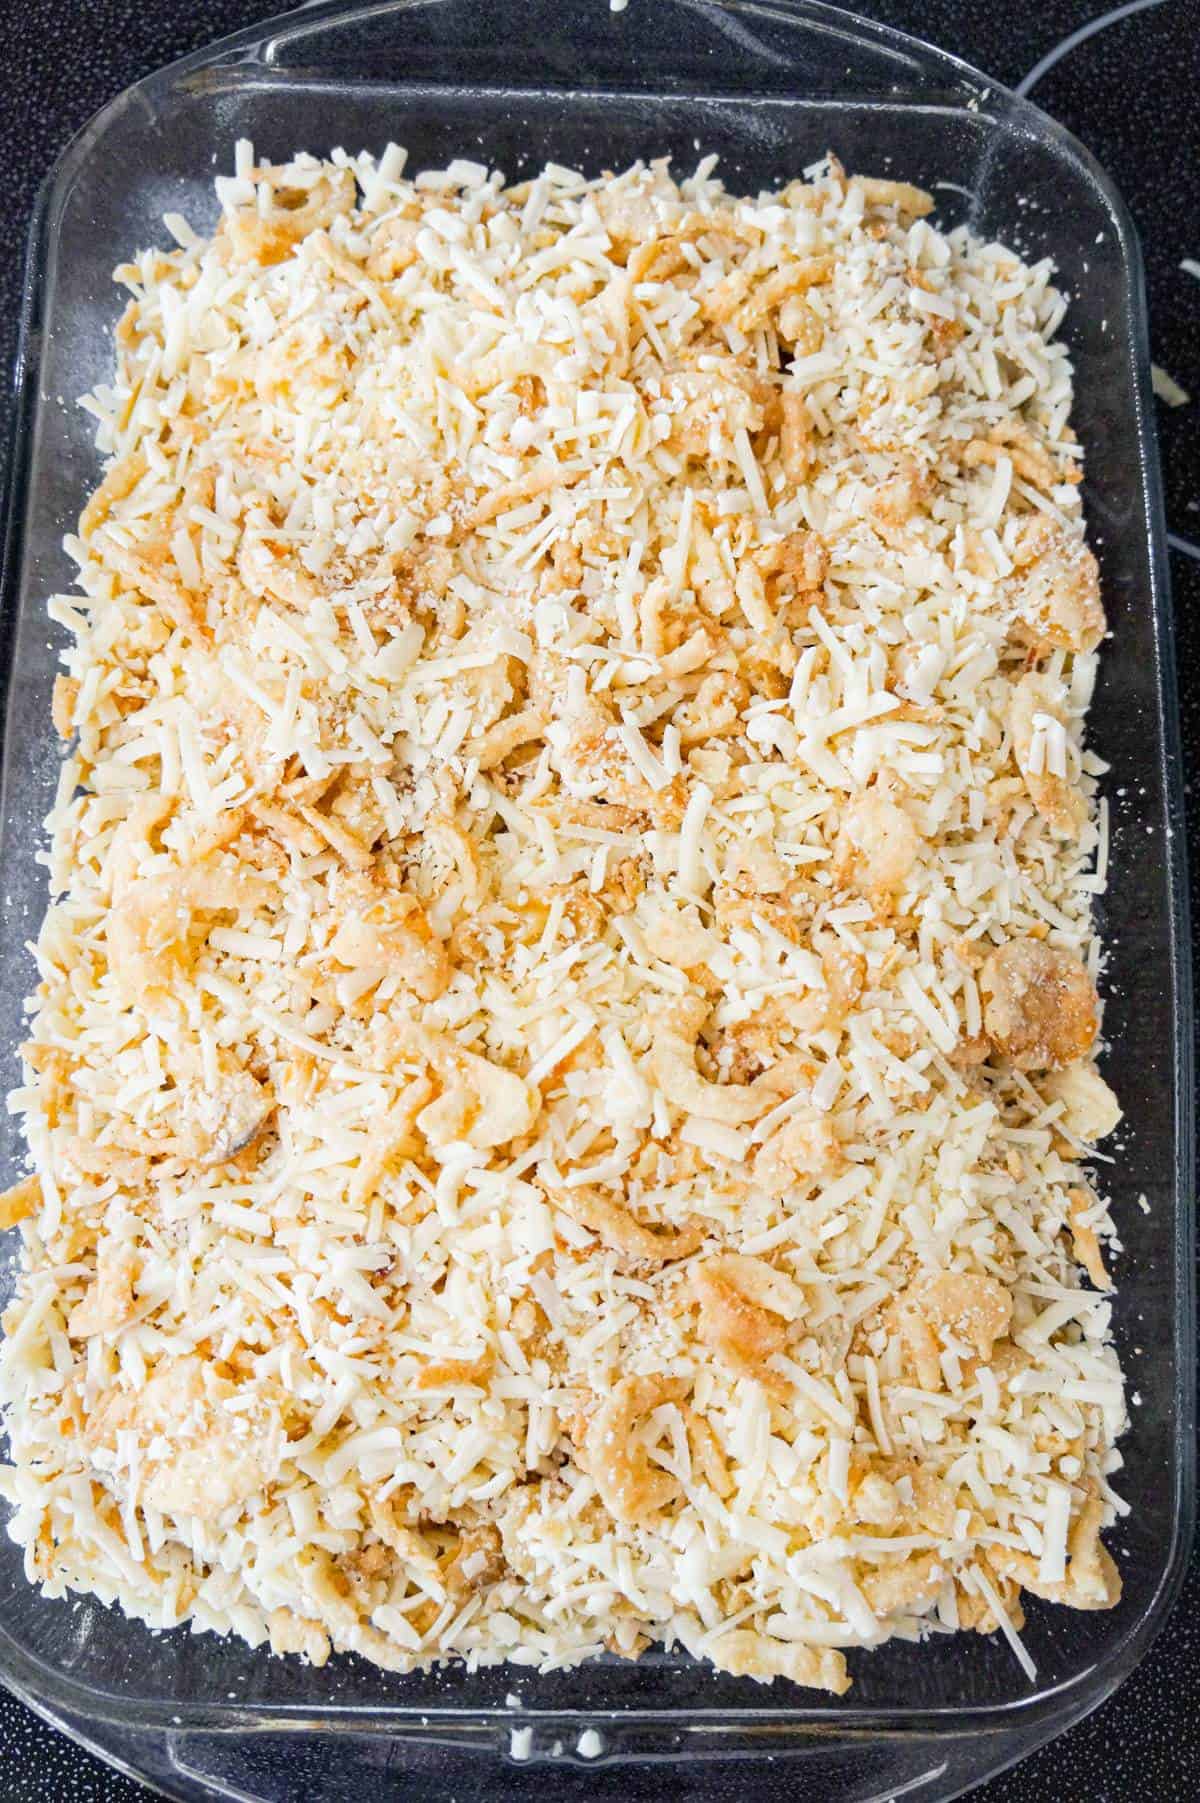 shredded cheese and crispy fried onions on top of chicken casserole